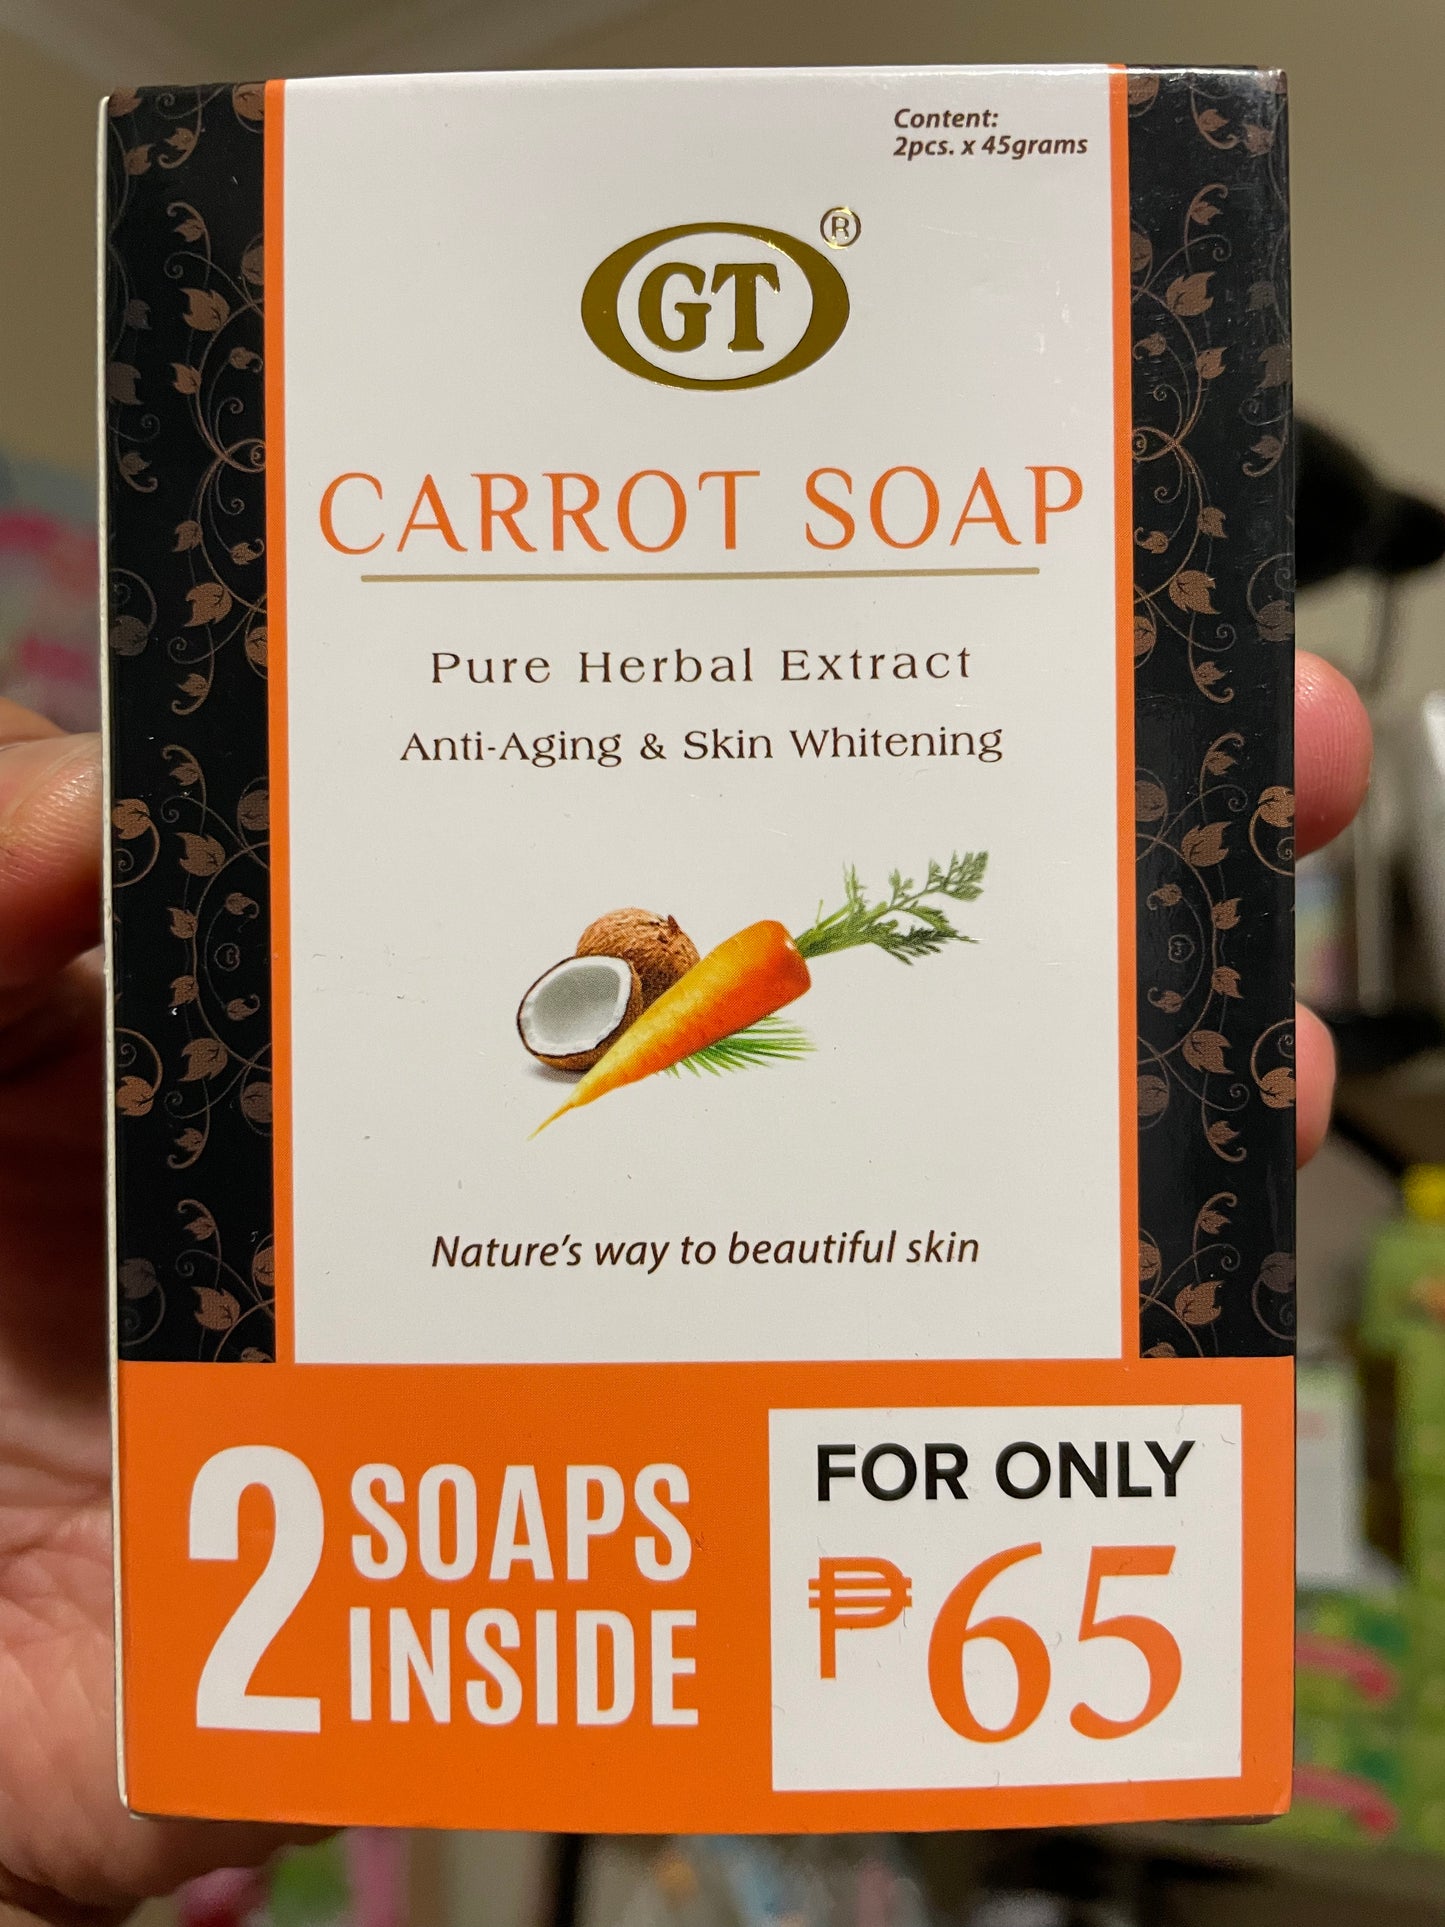 GT Carrot Soap Pure Herbal Extract  2 pcs. x 45g